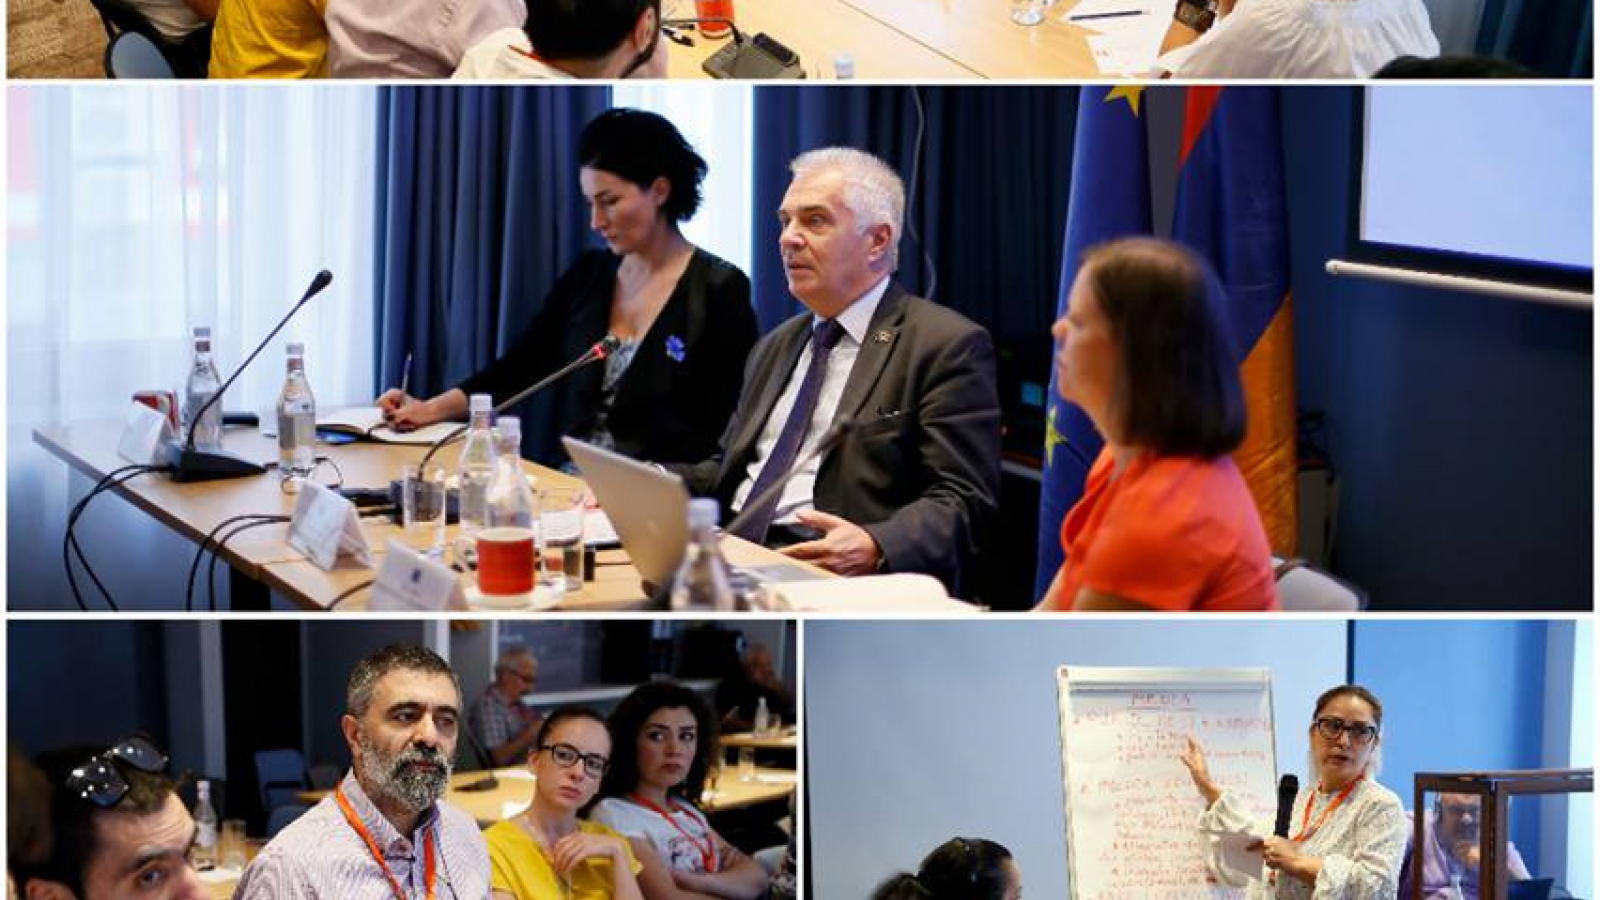 EU calls for comments on draft EU Roadmap for Engagement with Civil Society in Armenia